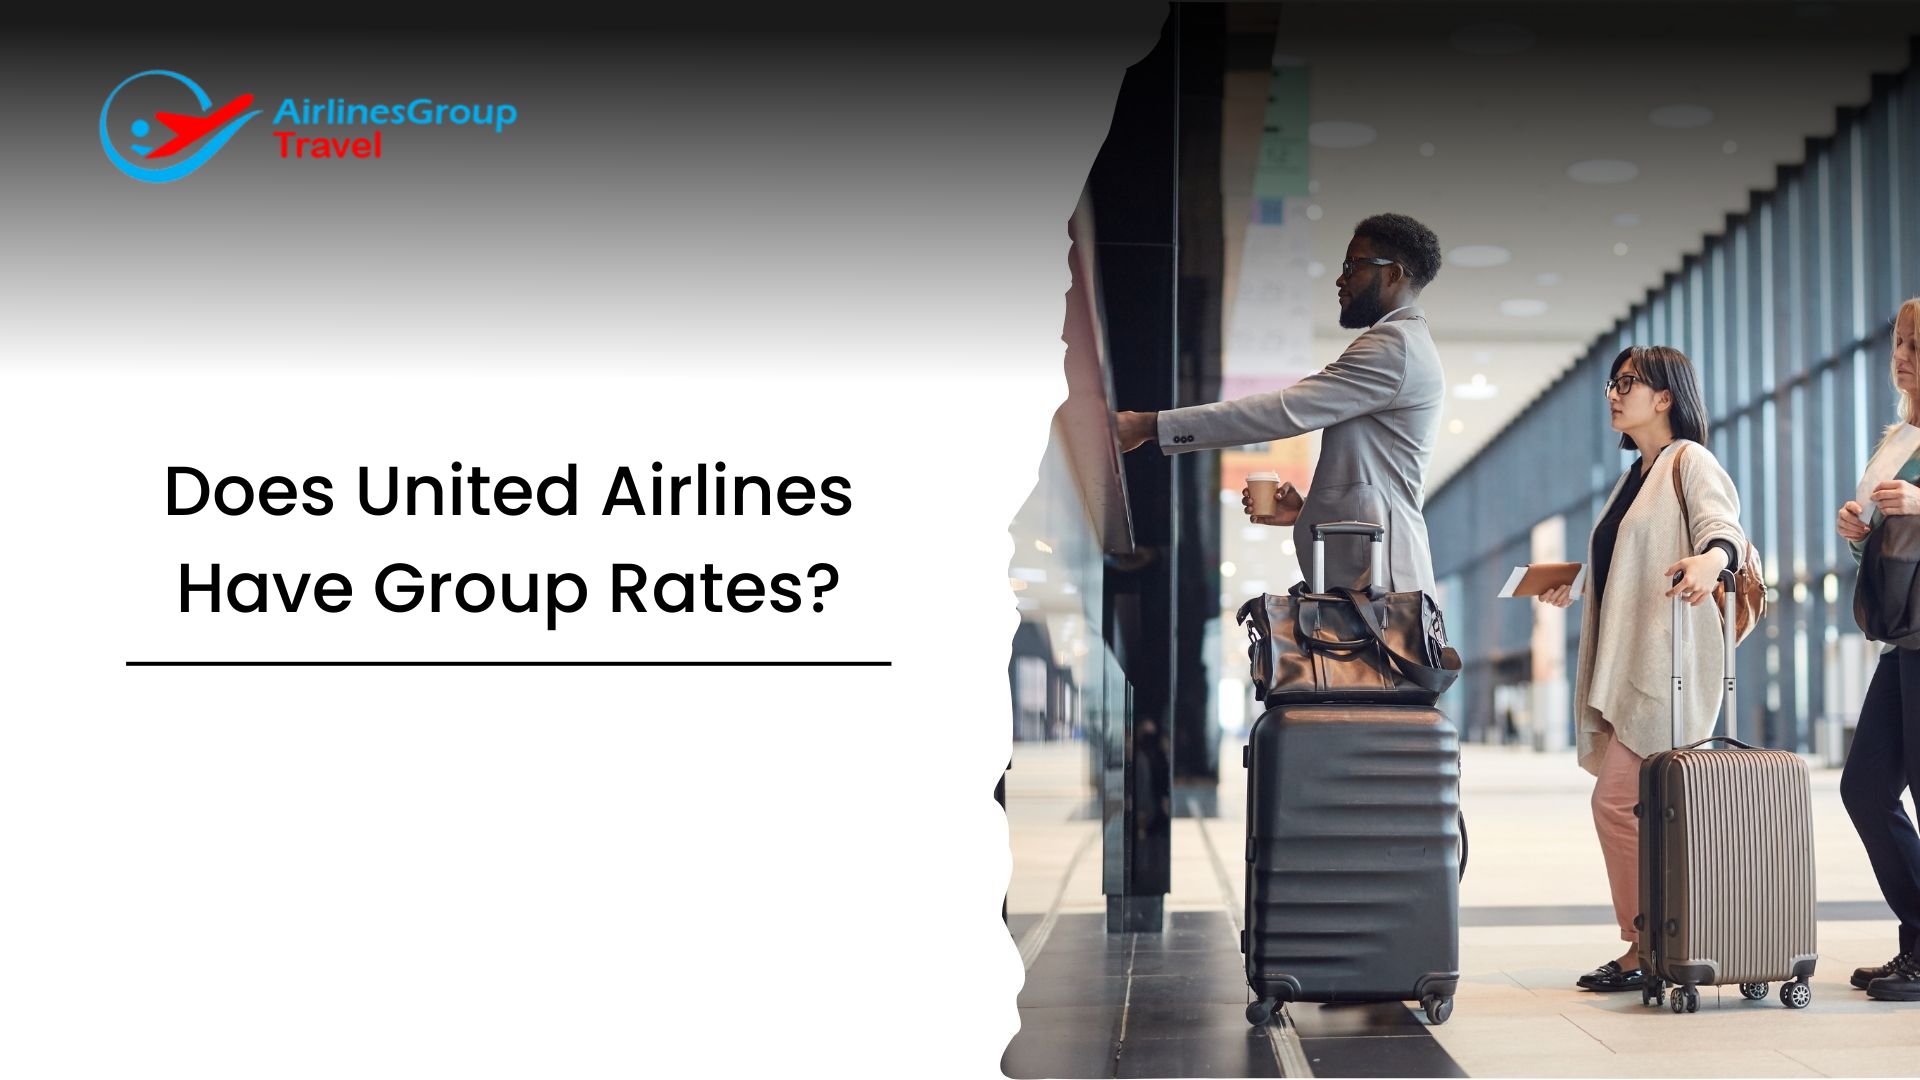 Airlines Group Travel